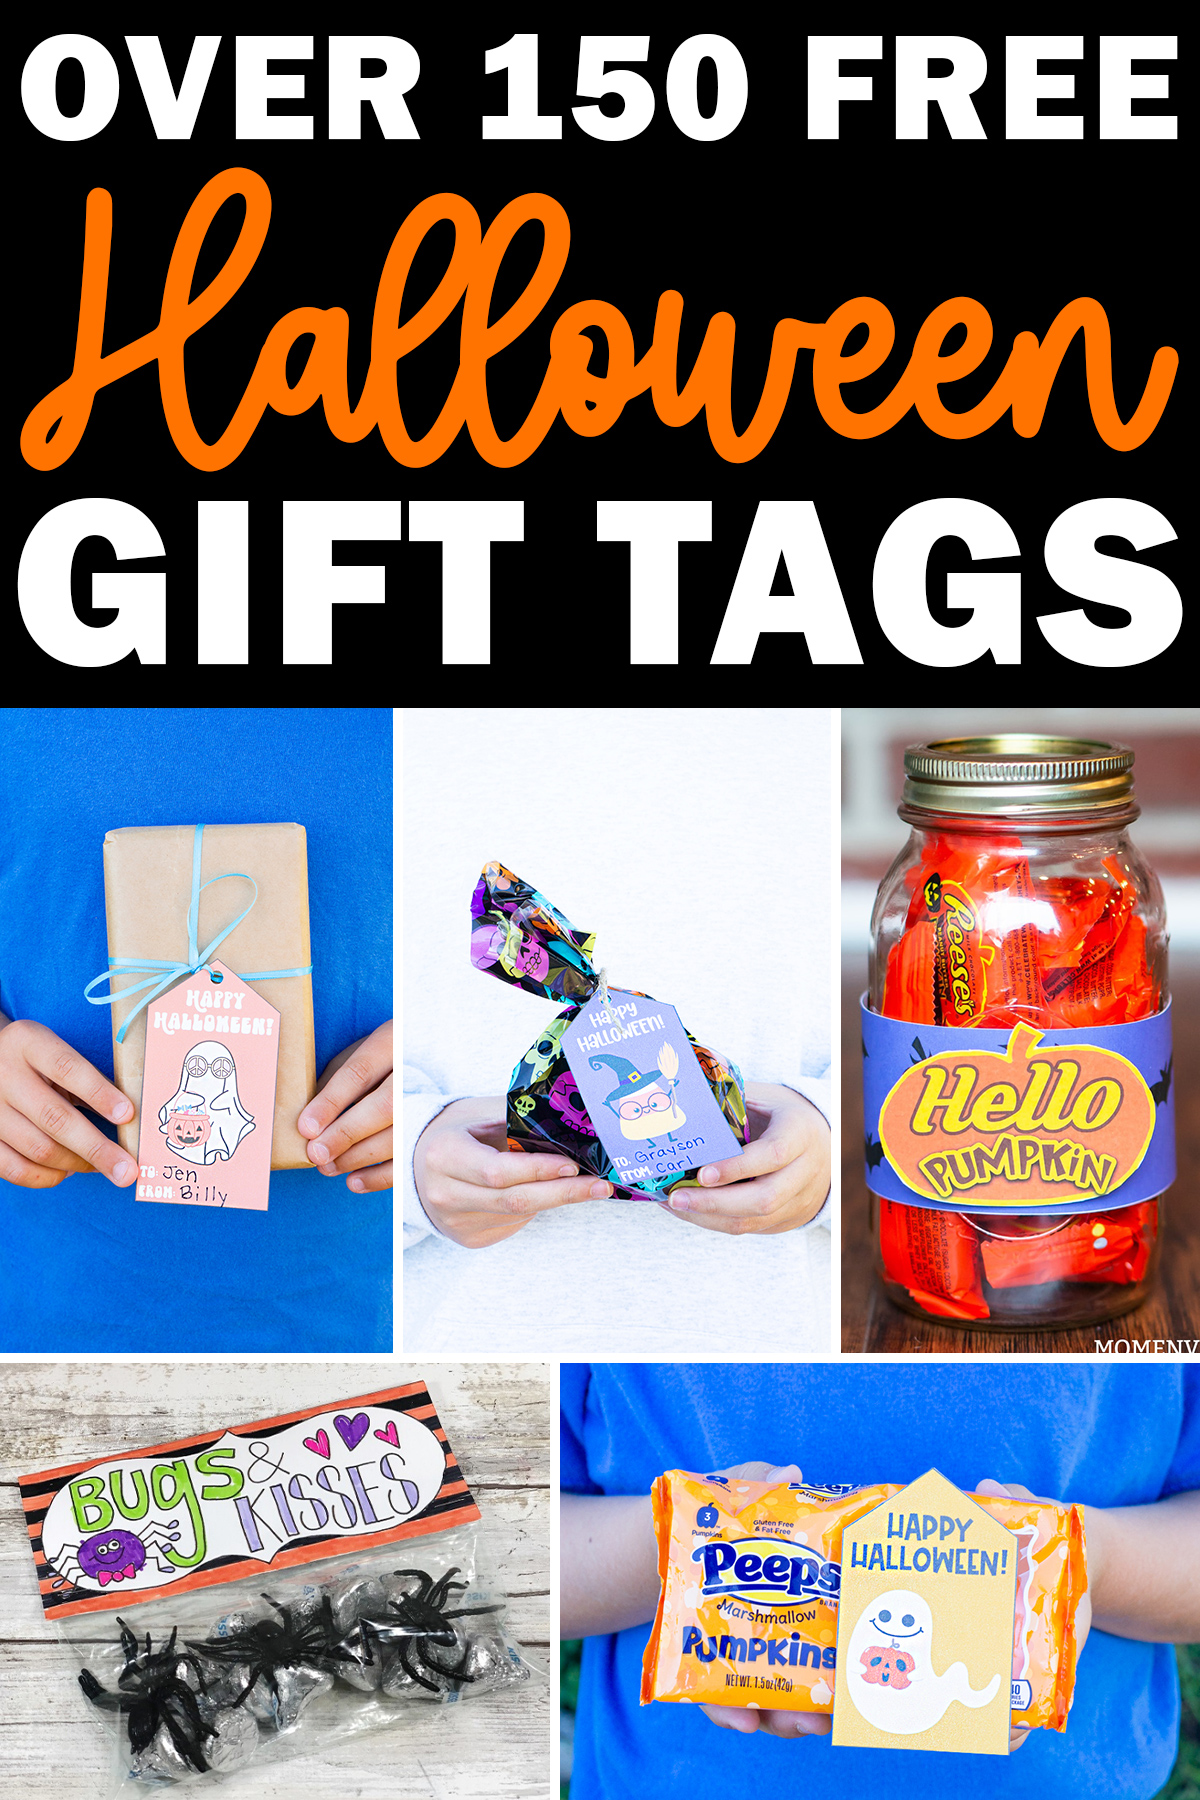 At the top it says over 150 Free Halloween Gift Tags. Below that are some examples of the gift tags available.